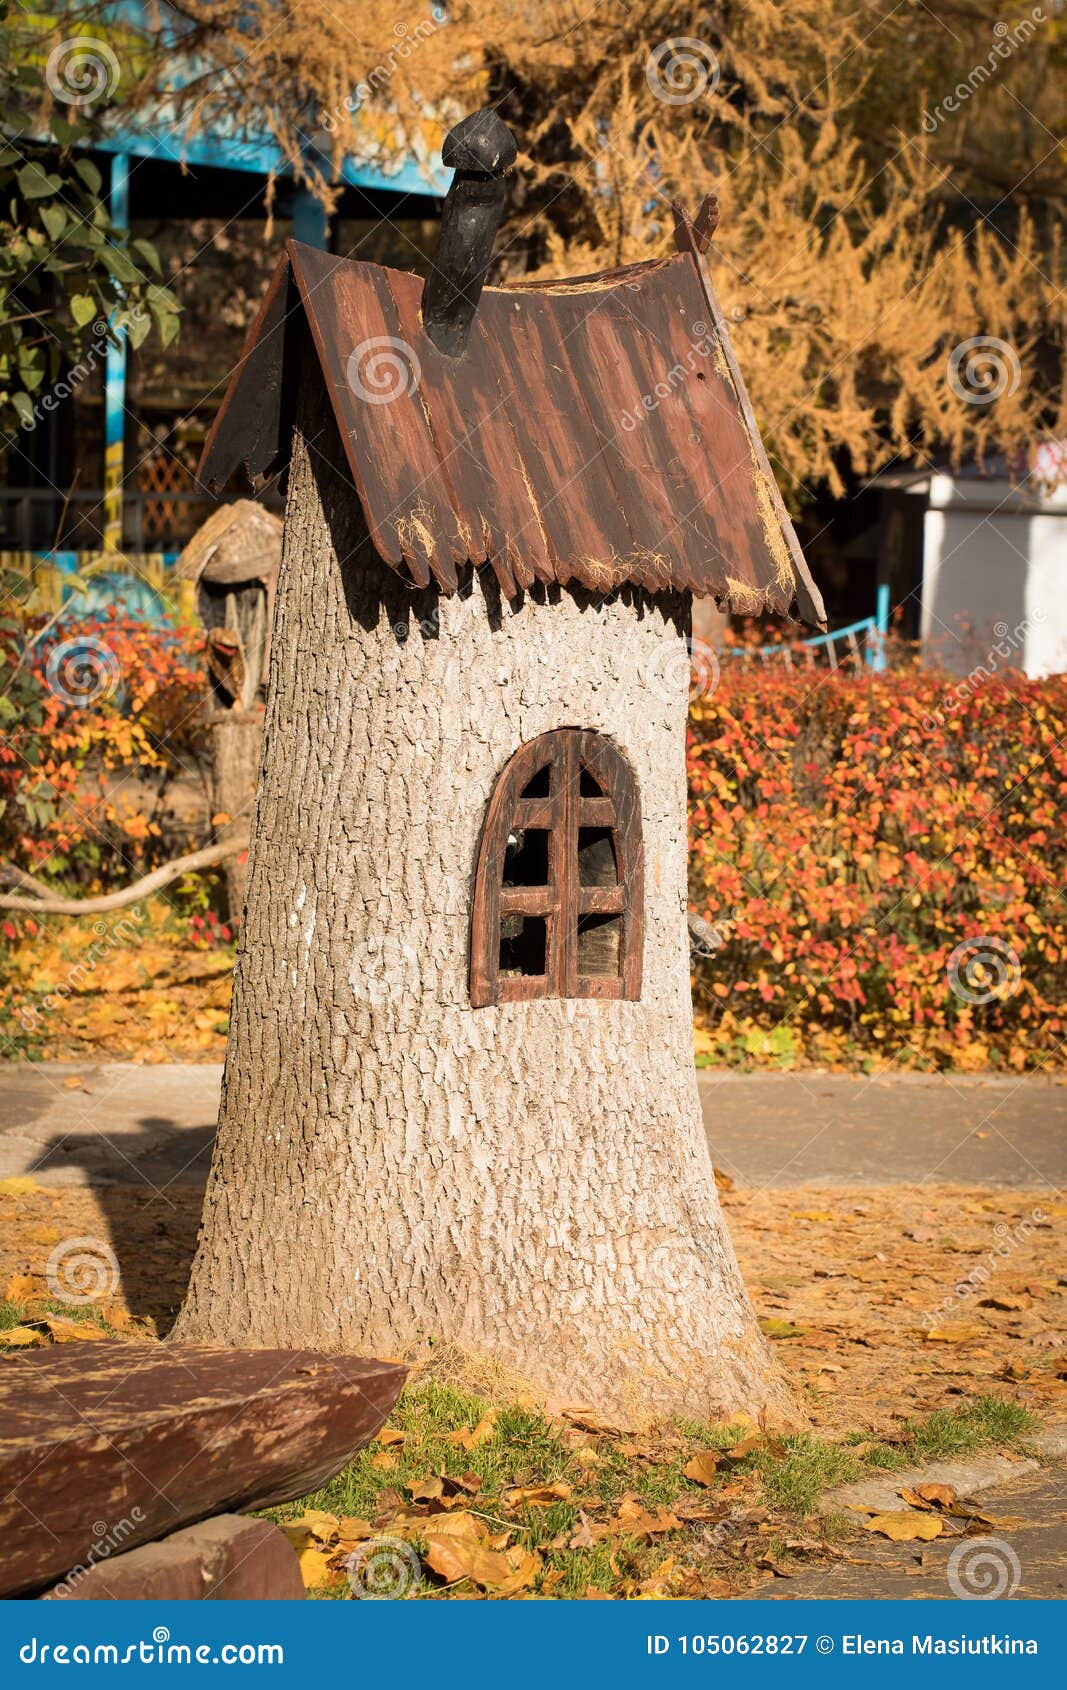 Decorative House From Tree Stump In Park Stock Image Image Of